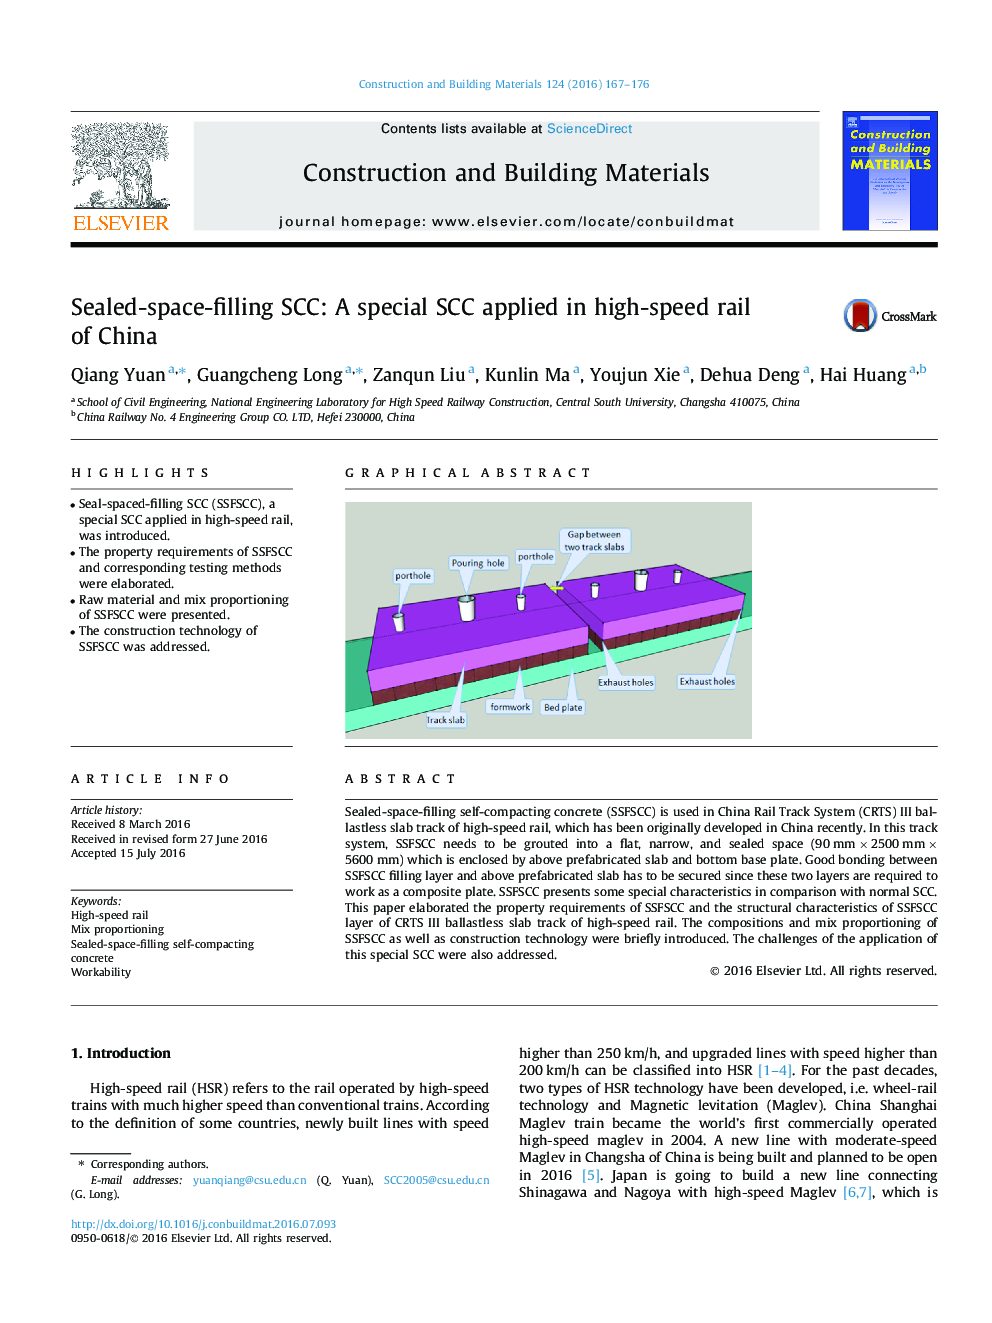 Sealed-space-filling SCC: A special SCC applied in high-speed rail of China